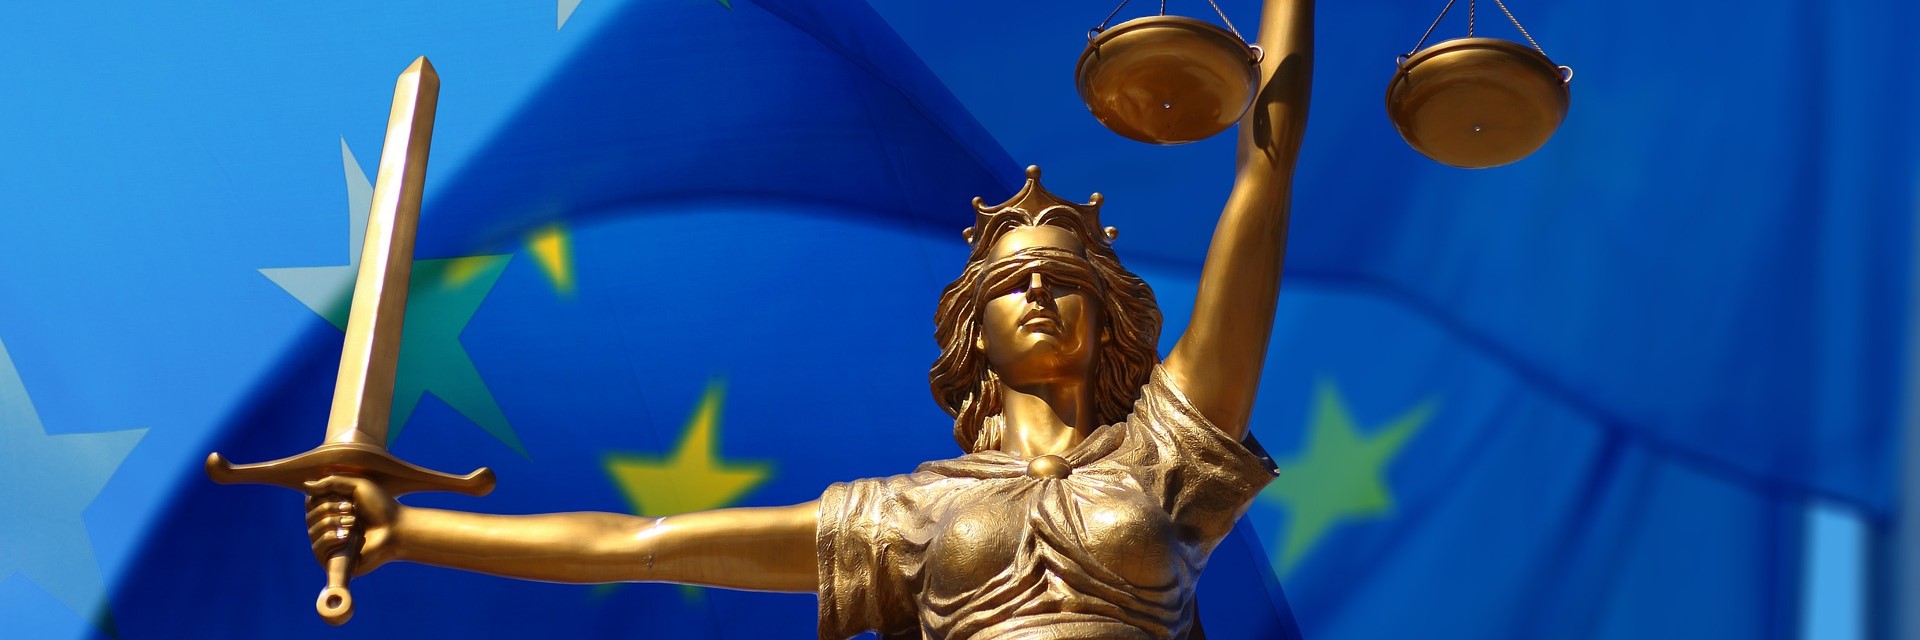 Roman goddess Justitia in front of a European flag